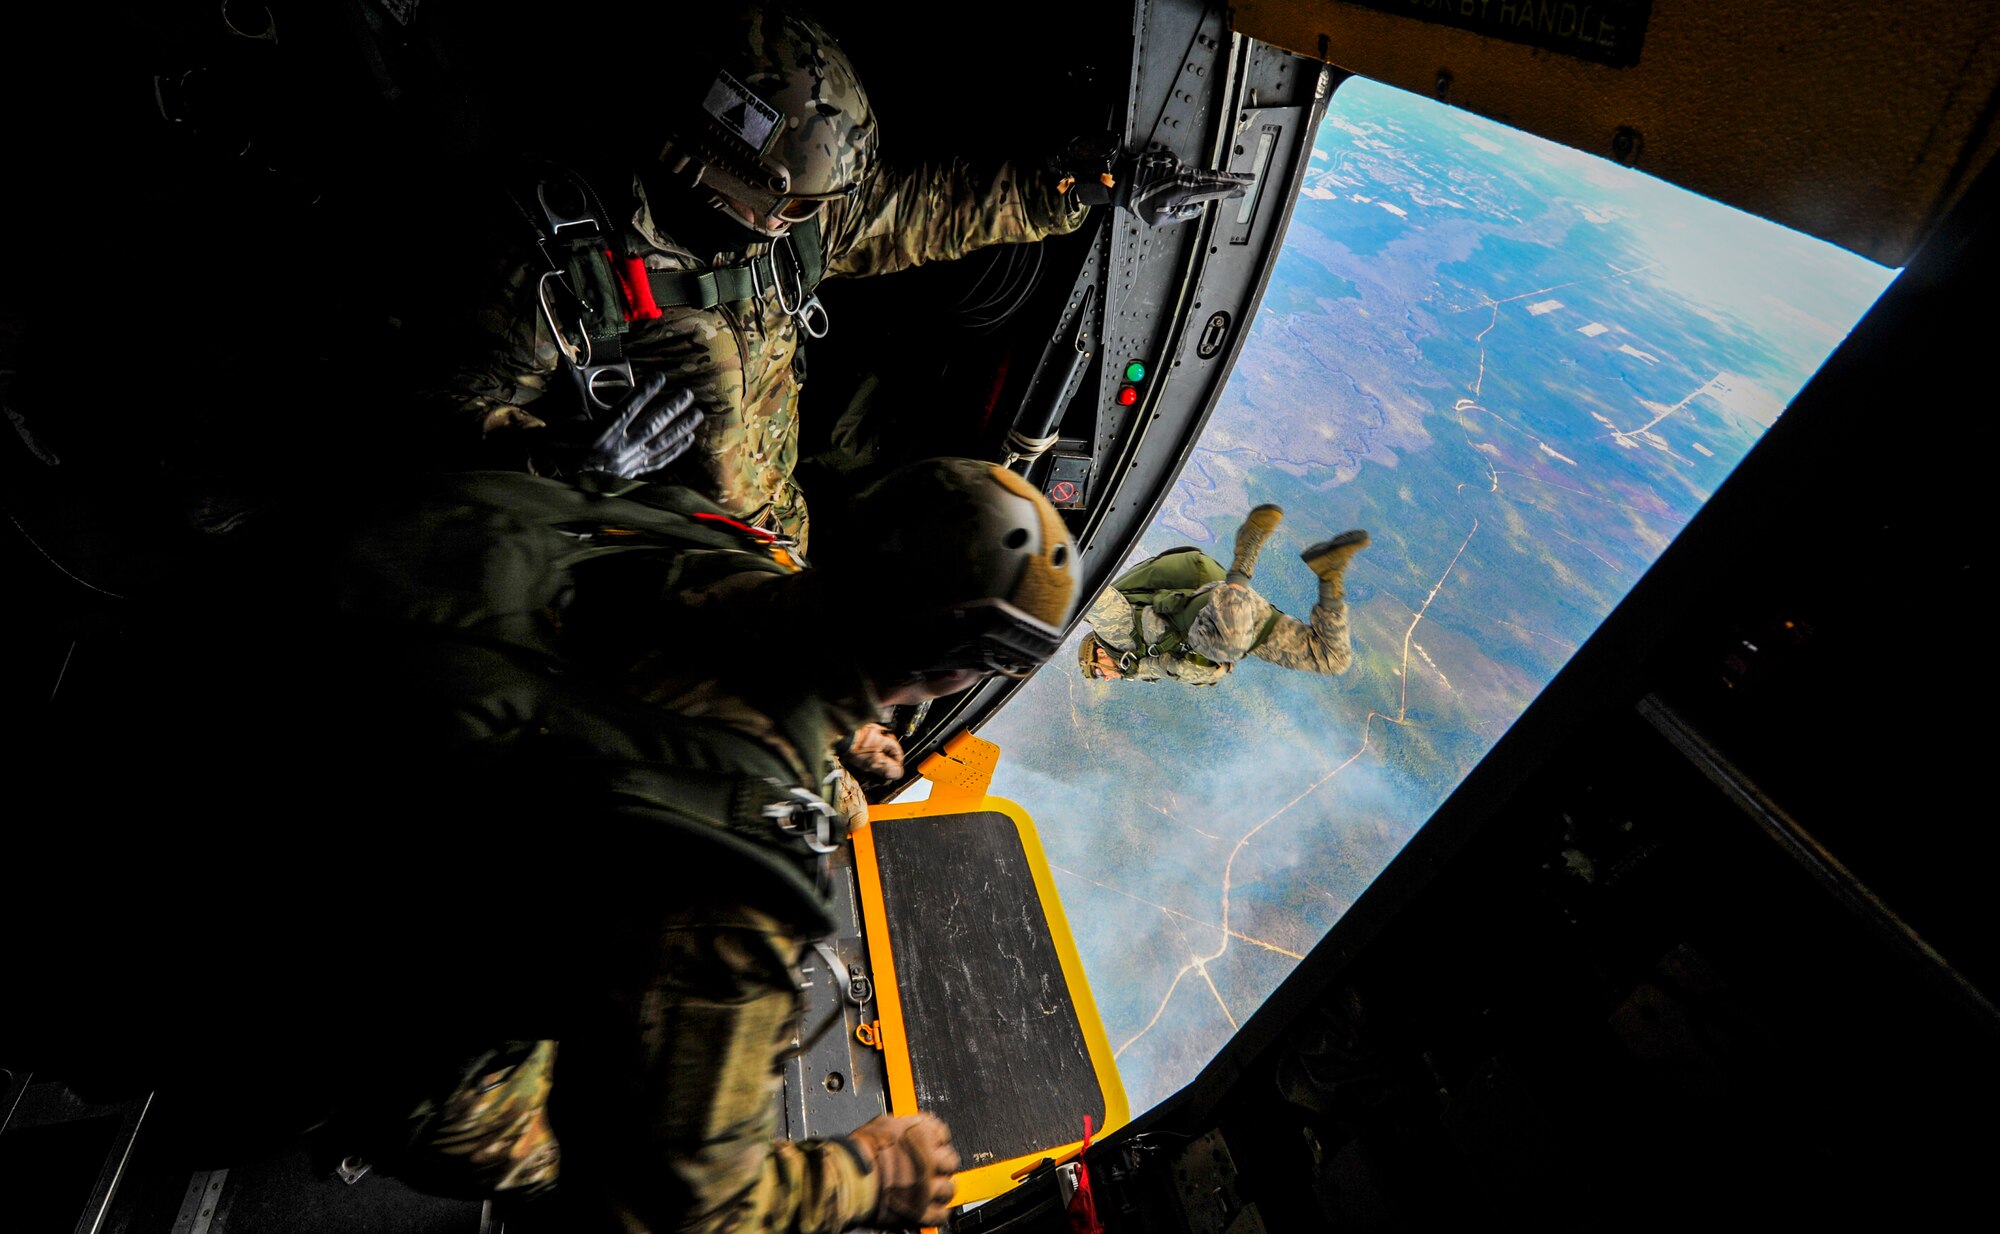 Special Tactics Airmen from the 24th Special Operations Wing jump out of an MC-130H Talon II at Hurlburt Field, Fla., Jan. 7, 2014. The Airmen were from various special tactics career fields, including special operations weathermen, combat controllers, pararescuemen and tactical air control parties. The 24th SOW’s mission is to provide Special Tactics forces for rapid global employment to enable airpower success. (U.S. Air Force photo/Senior Airman Christopher Callaway)